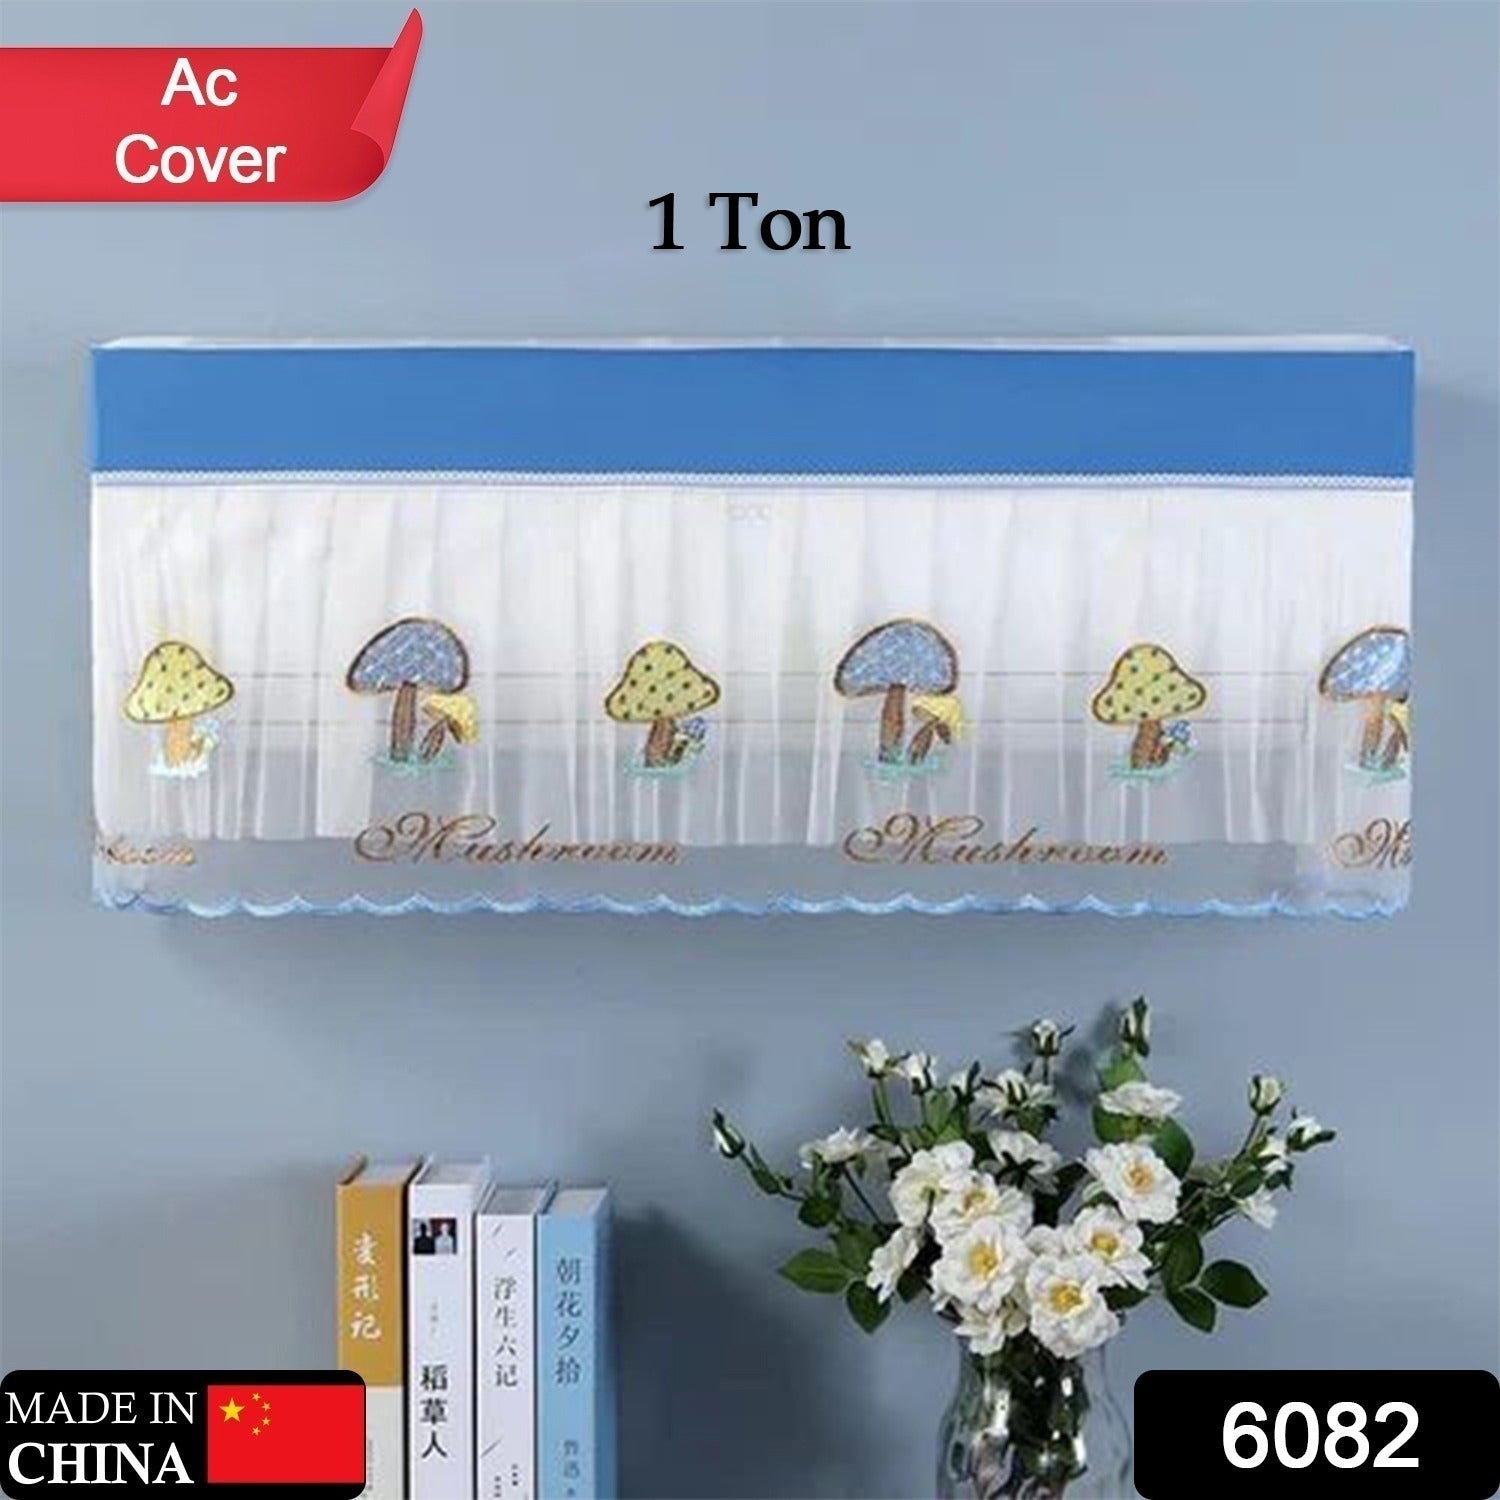 6082 Ac Cover Air Conditioning Dust Cover Folding Designer Ac Cover For Indoor Split Cover Washable Foldable Dustproof Cover  ( approx 1 Ton / Mix Design / 1 Pc) - deal99.in